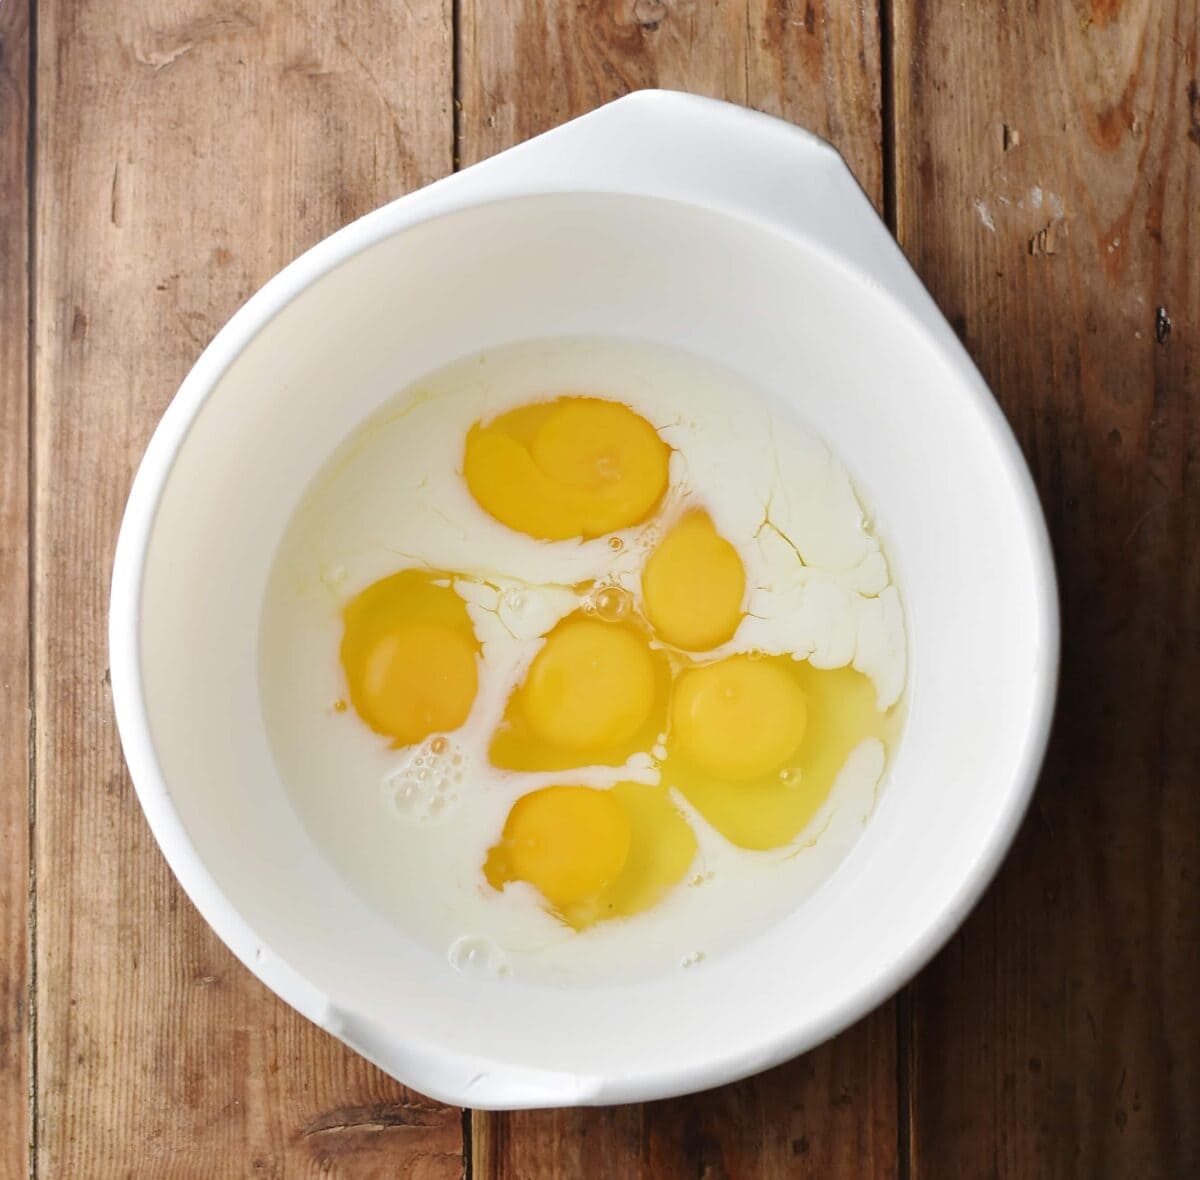 6 eggs and milk in large white bowl.